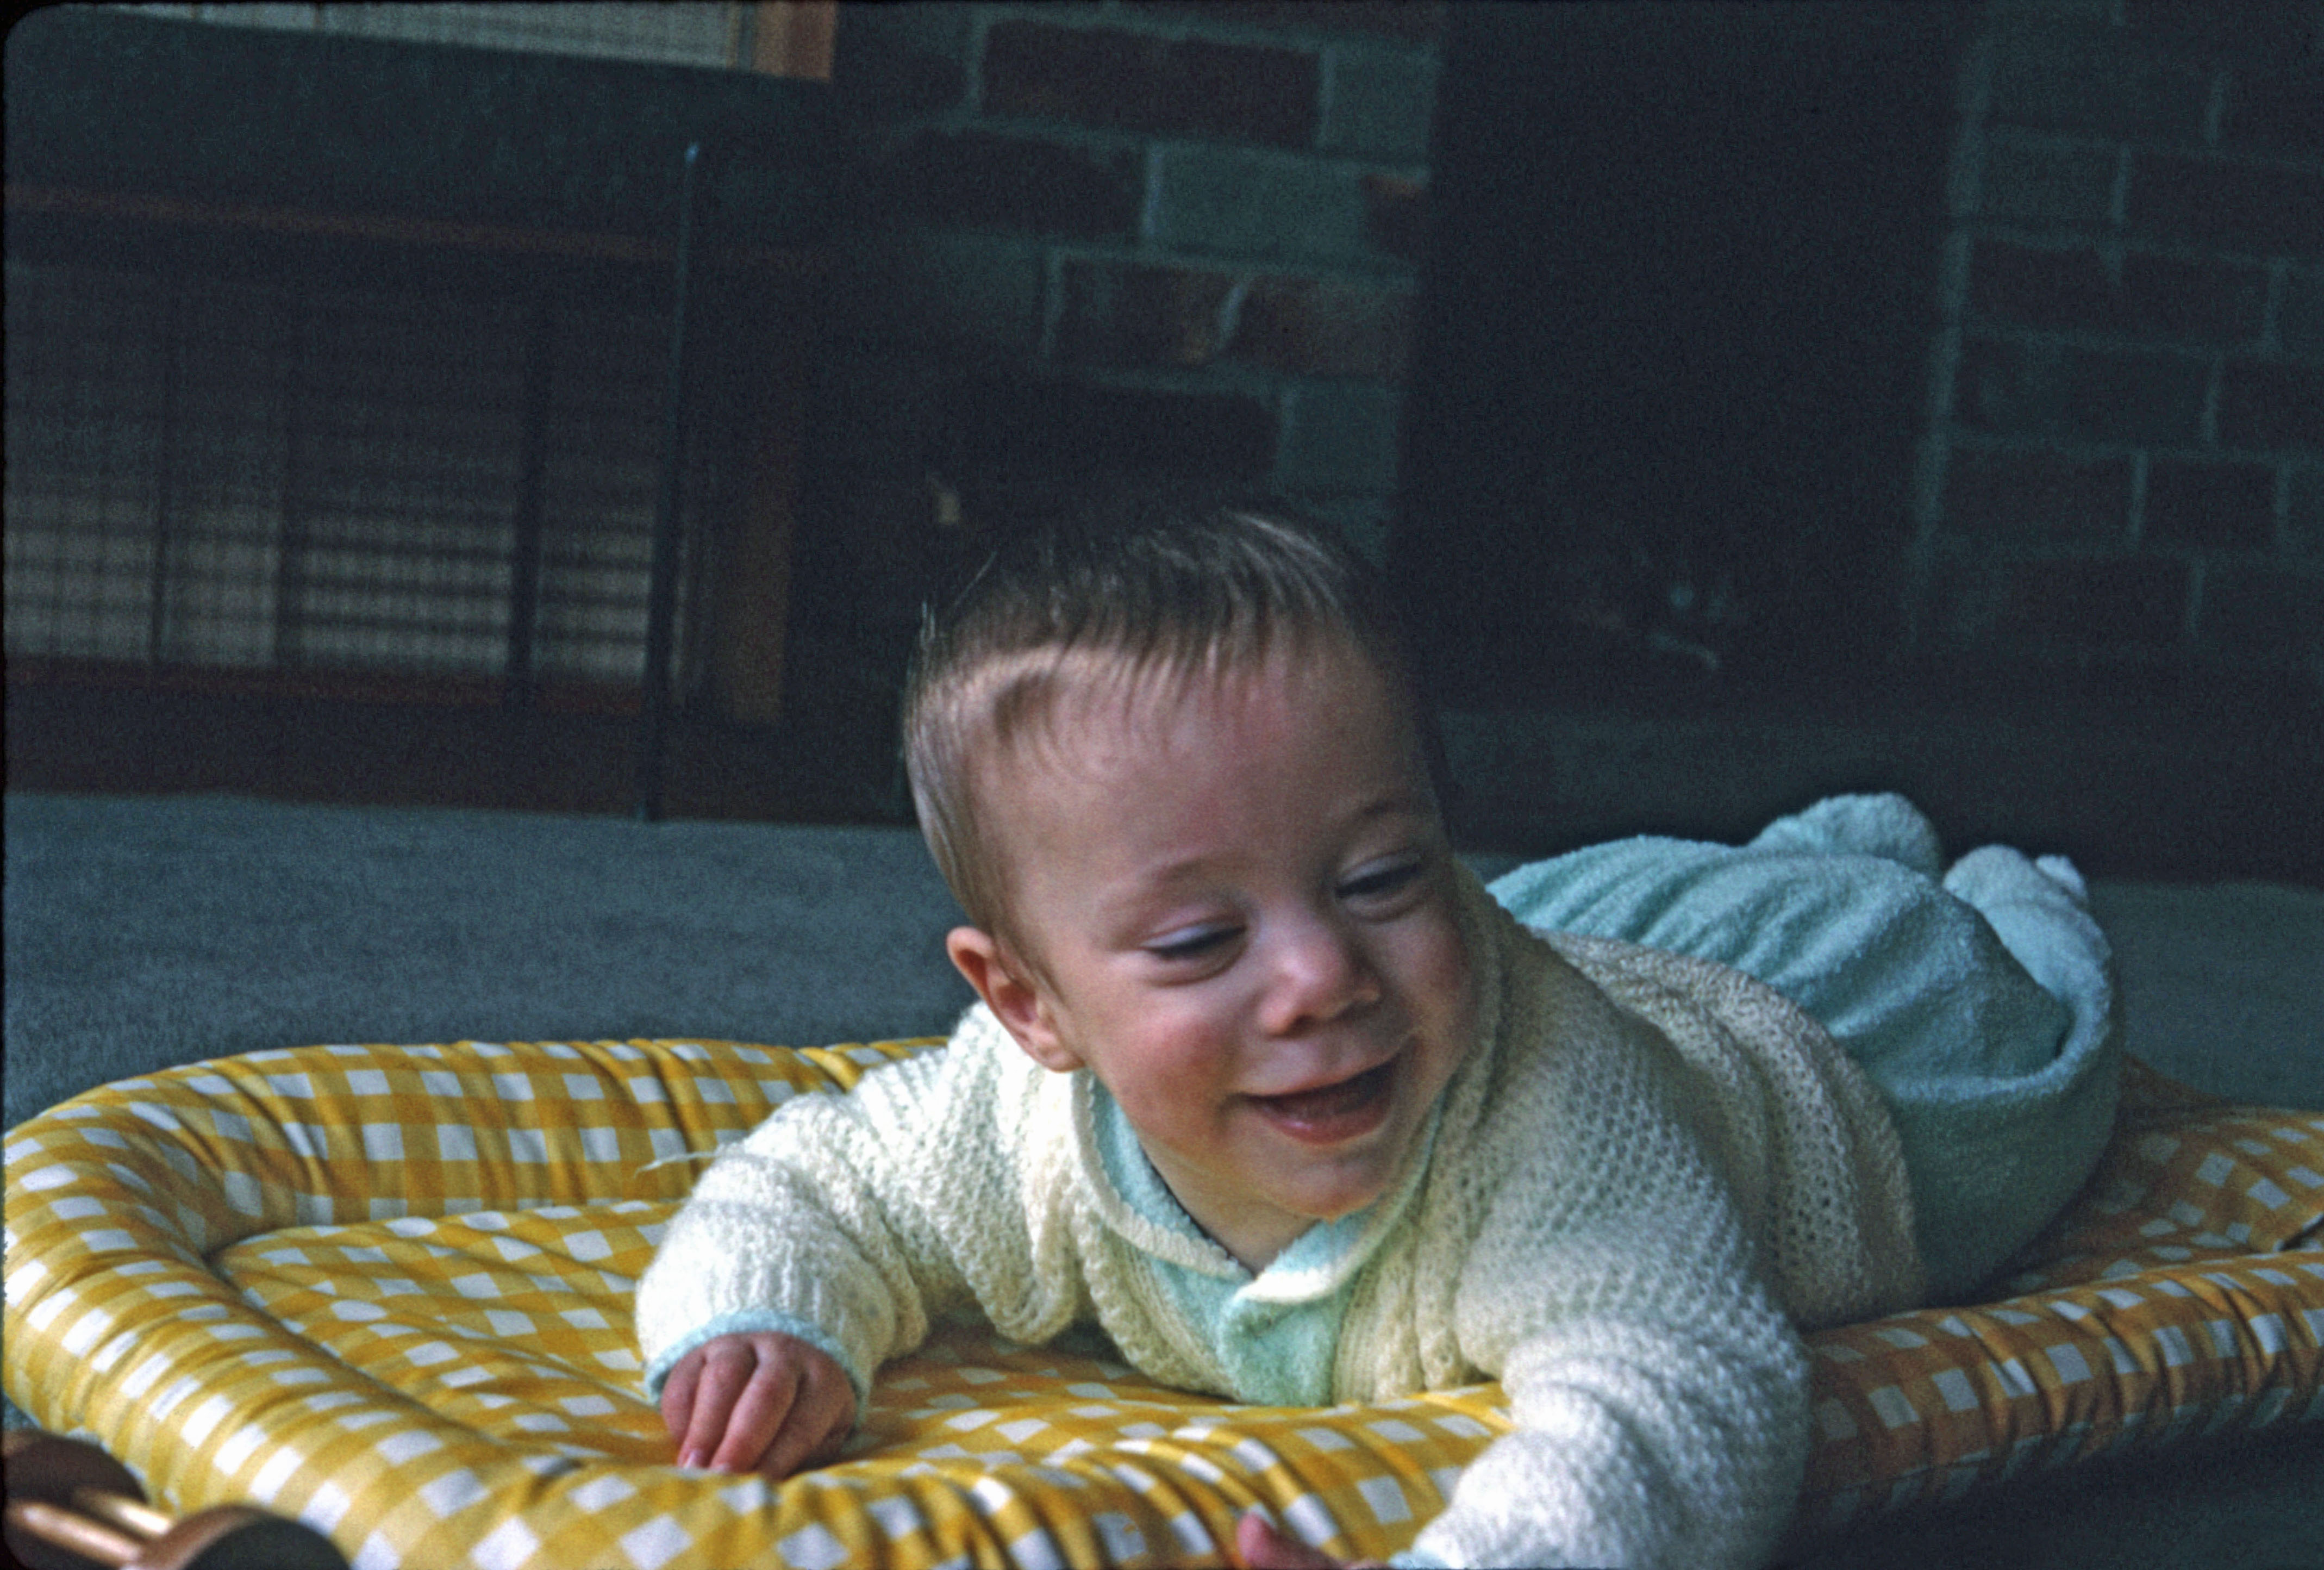 19 Mar 1966 Jonathan is now 7 months old